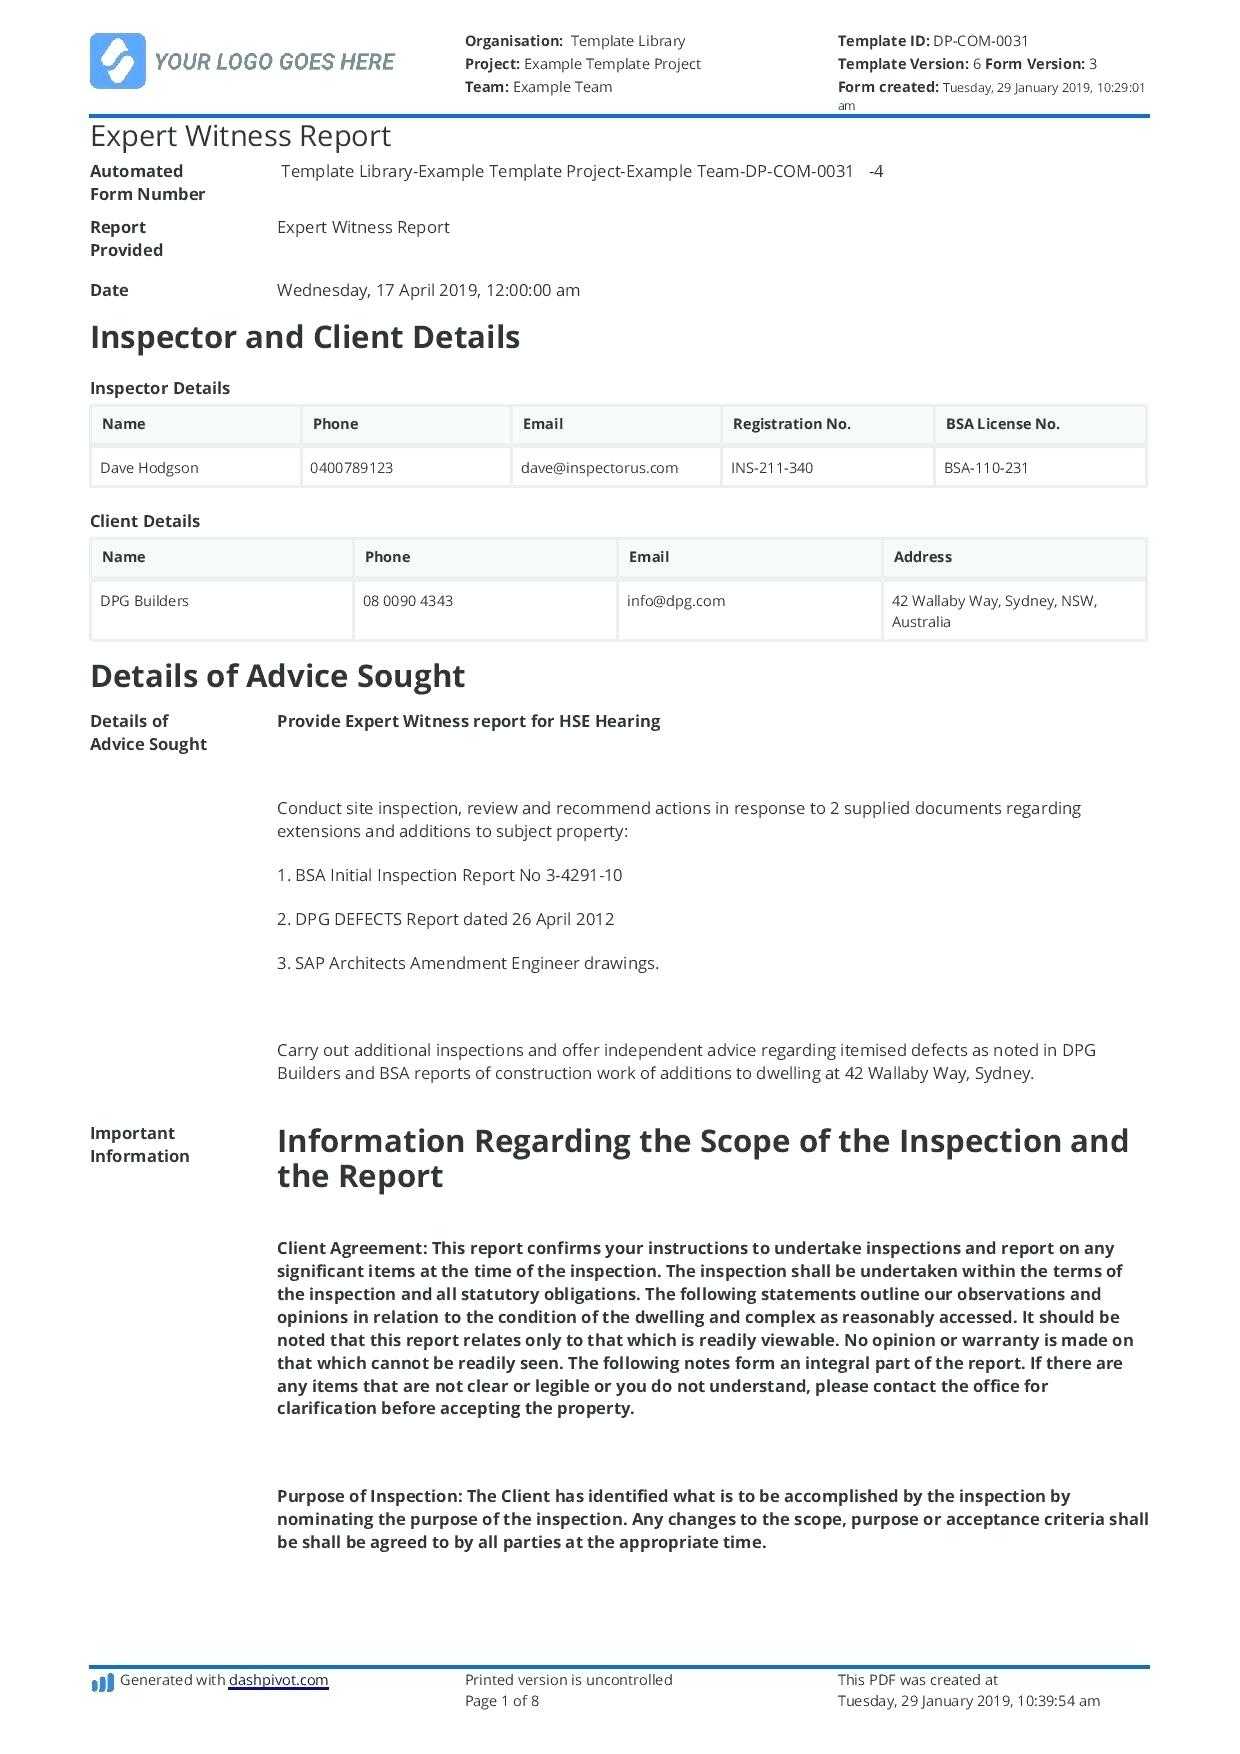 Data Breach Report Template Examples Investigation Incident In Expert Witness Report Template